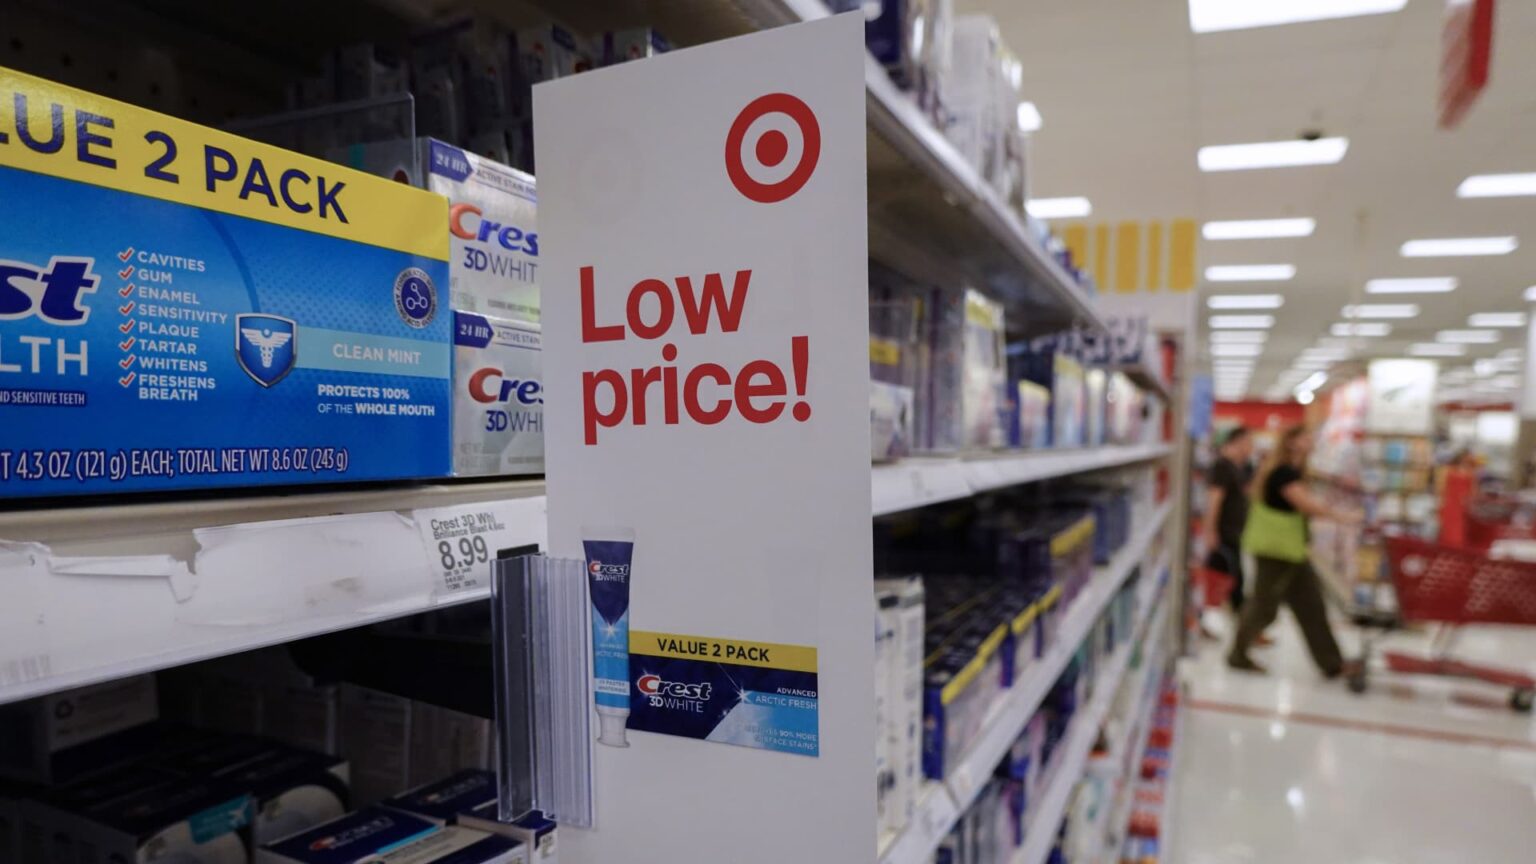 Target, Walmart, McDonald's cut prices and offer deals